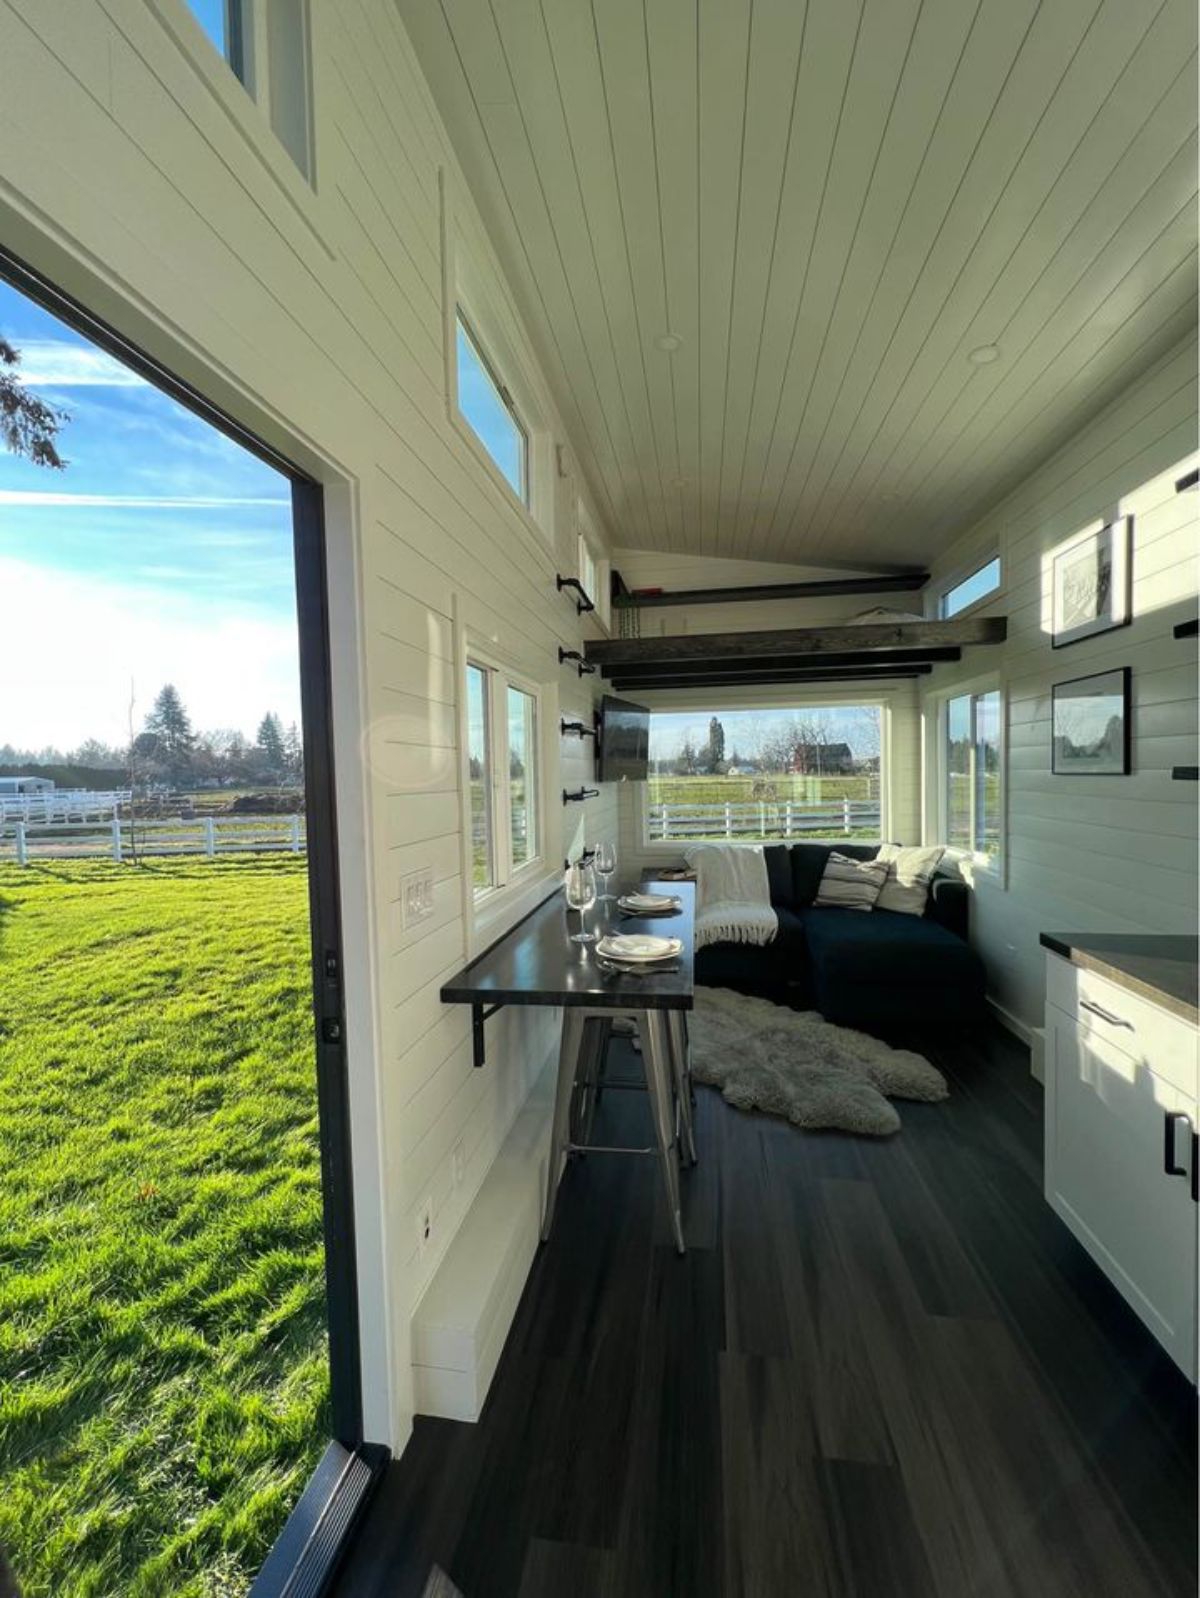 Full view of Modern Tiny Home on Wheels from inside